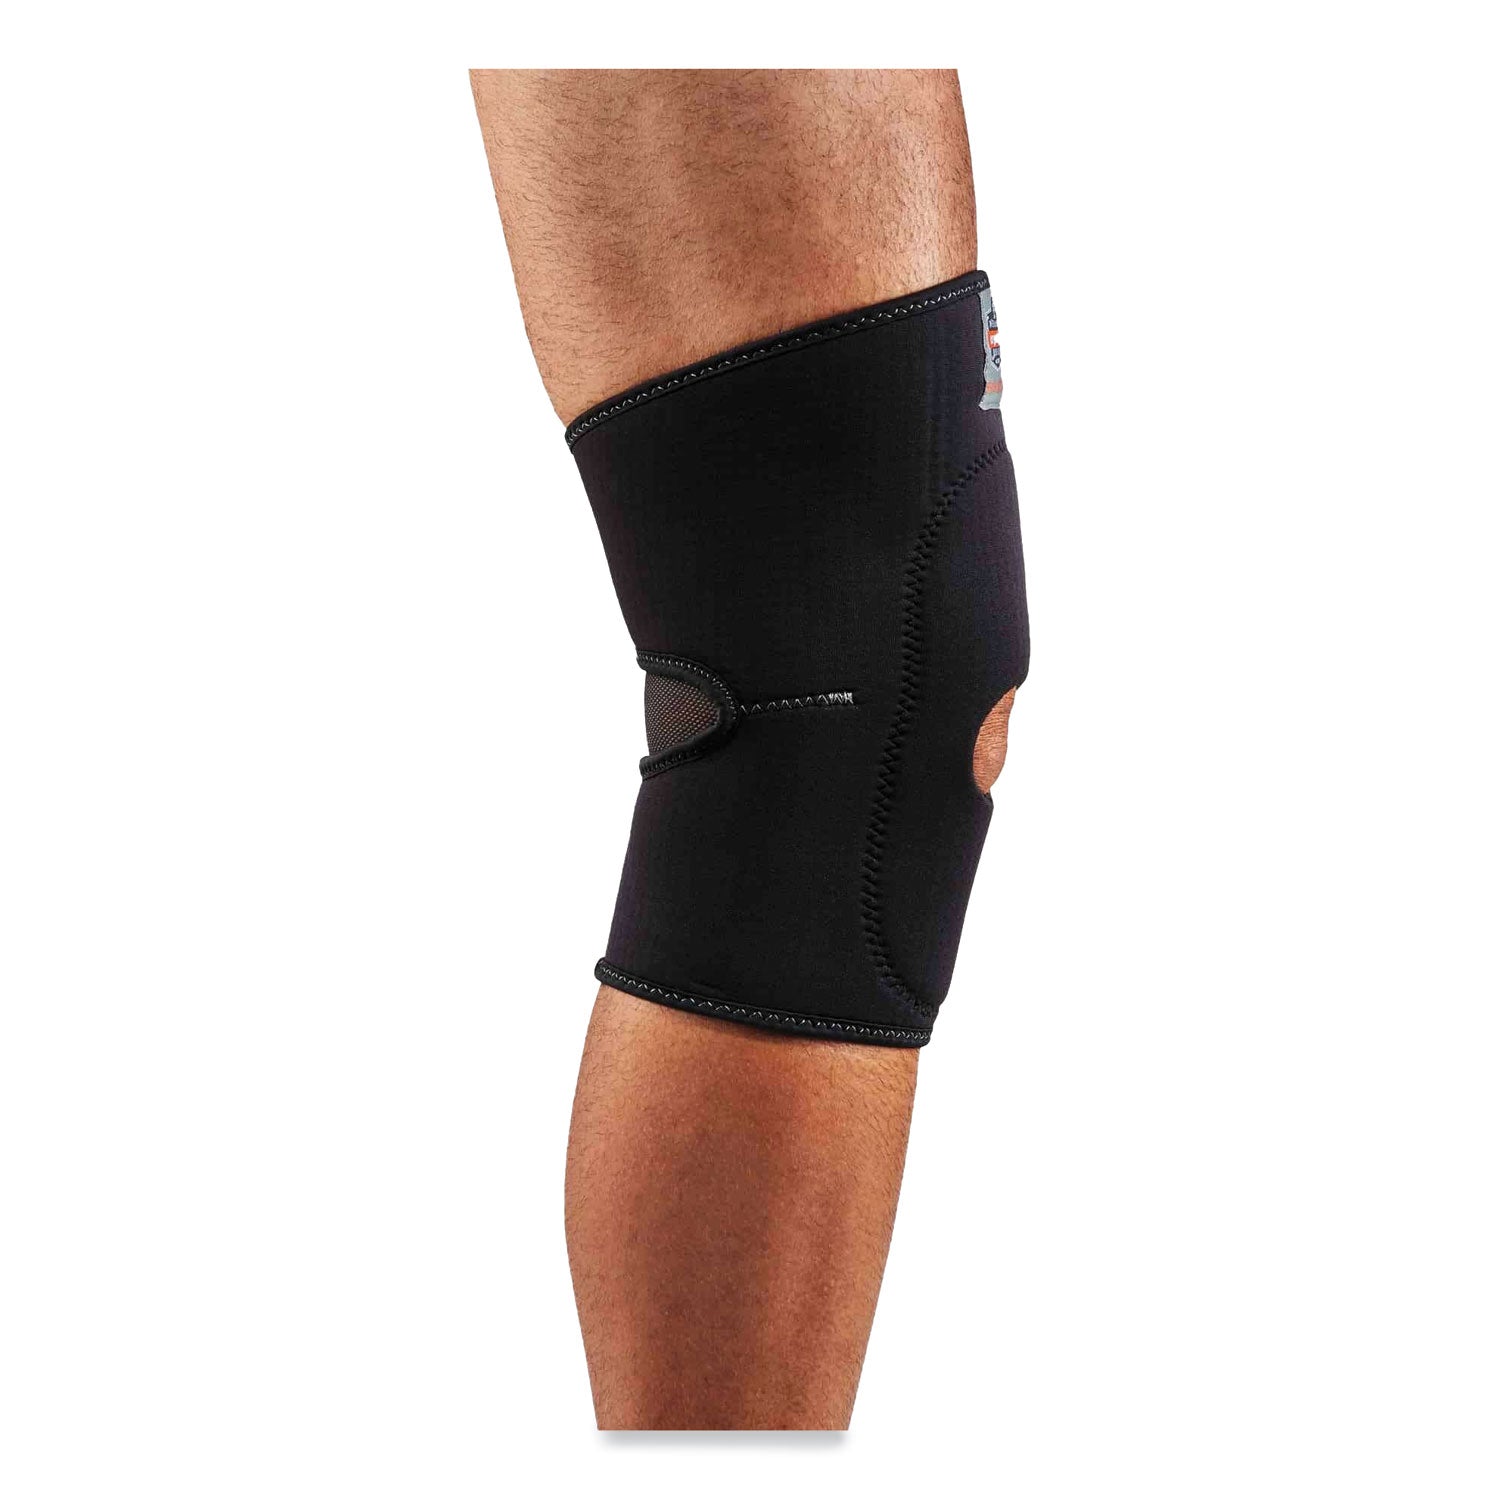 proflex-615-open-patella-anterior-pad-knee-sleeve-large-black-ships-in-1-3-business-days_ego16534 - 3